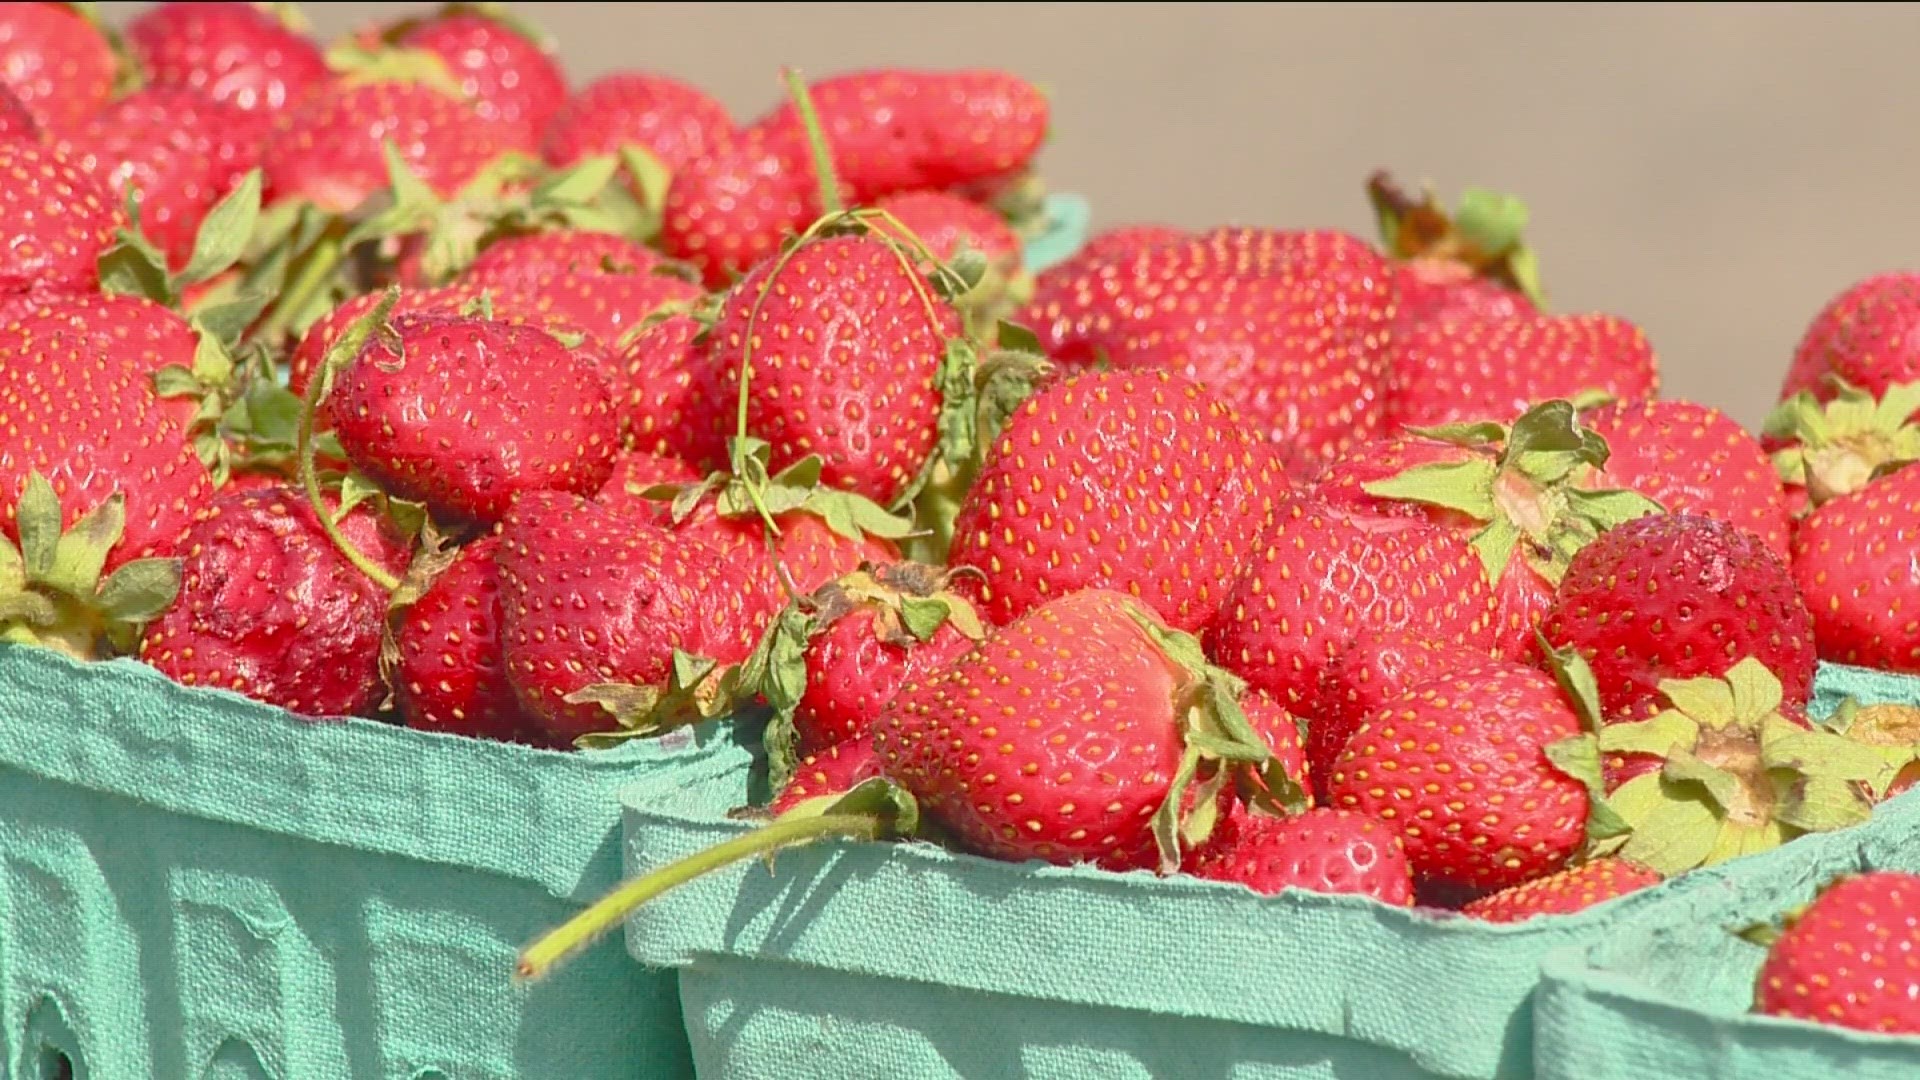 Now that it's the mid-point of the summer season, people have begun to harvest produce from their gardens. But for some Idaho families, gardens are a small business.